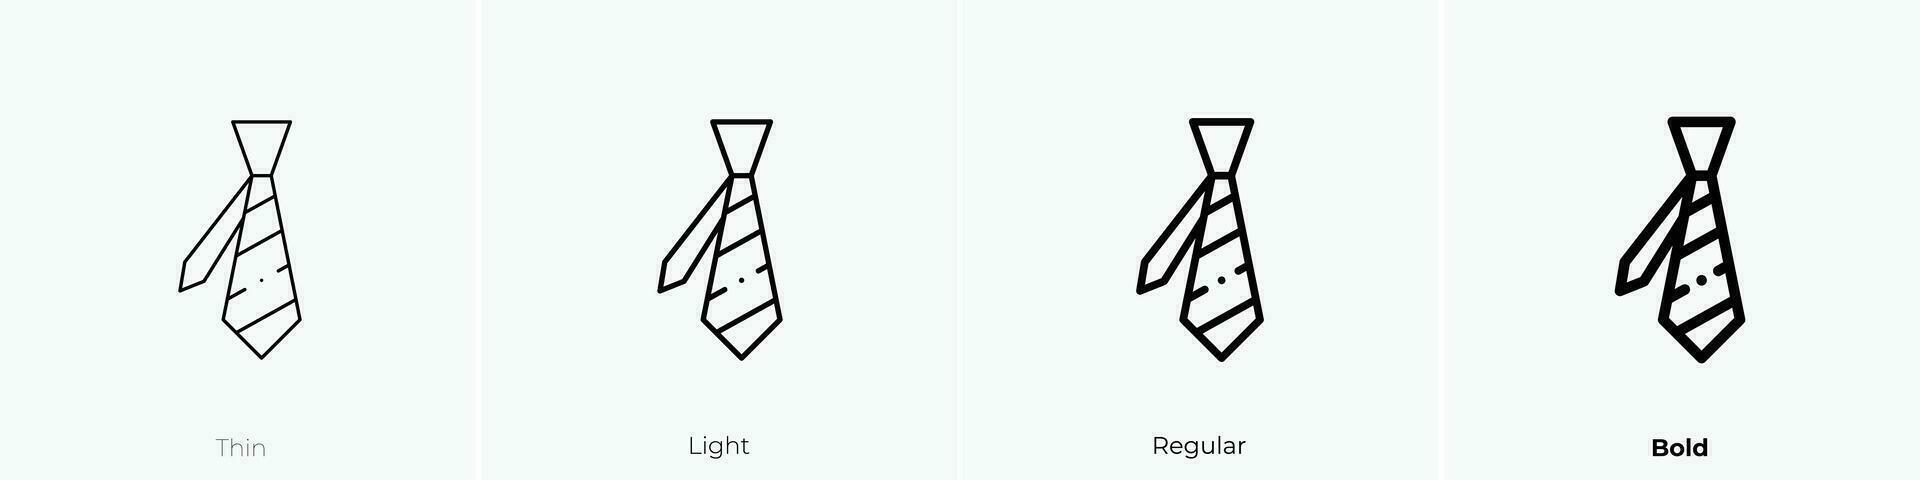 tie icon. Thin, Light, Regular And Bold style design isolated on white background vector